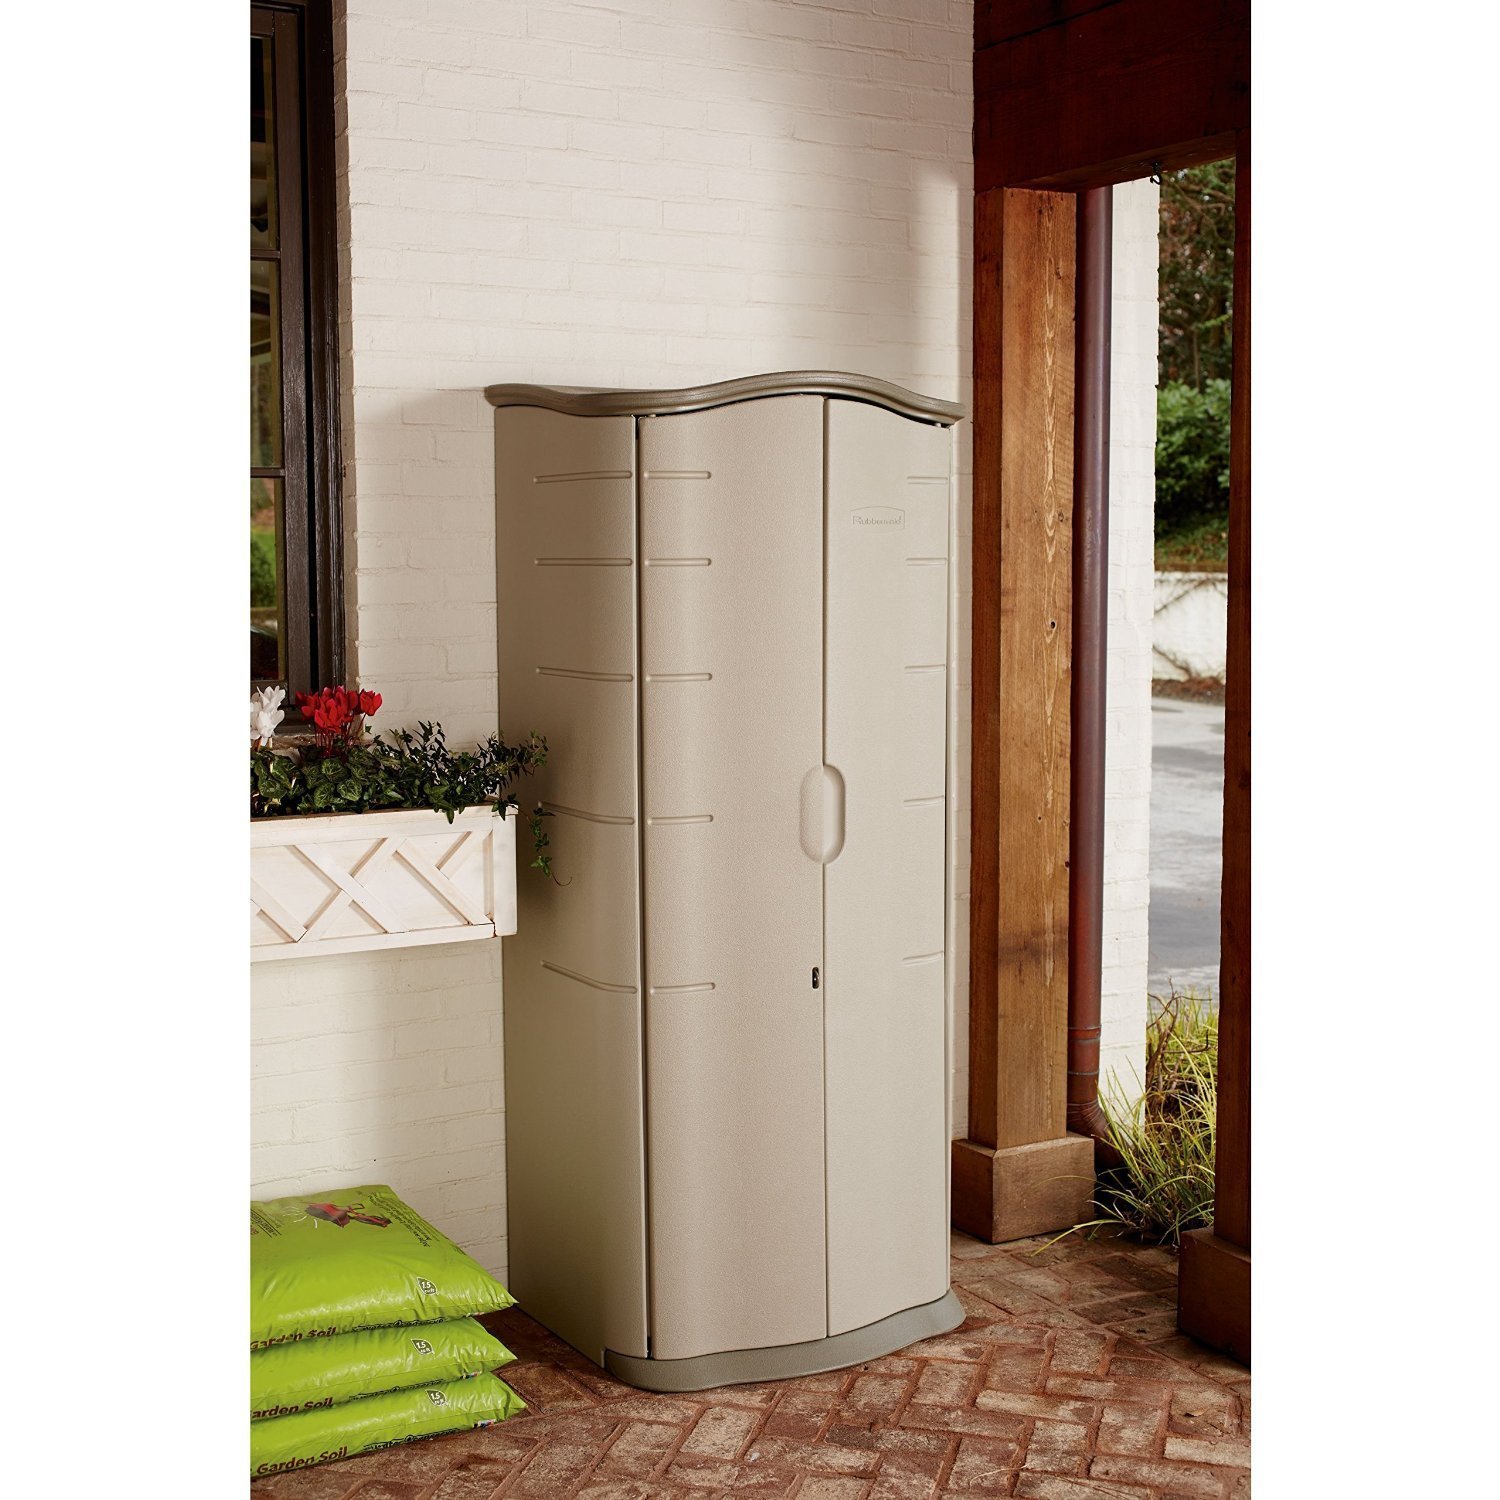 Rubbermaid 121-Gallon Vertical Storage Shed. Reviews and ...